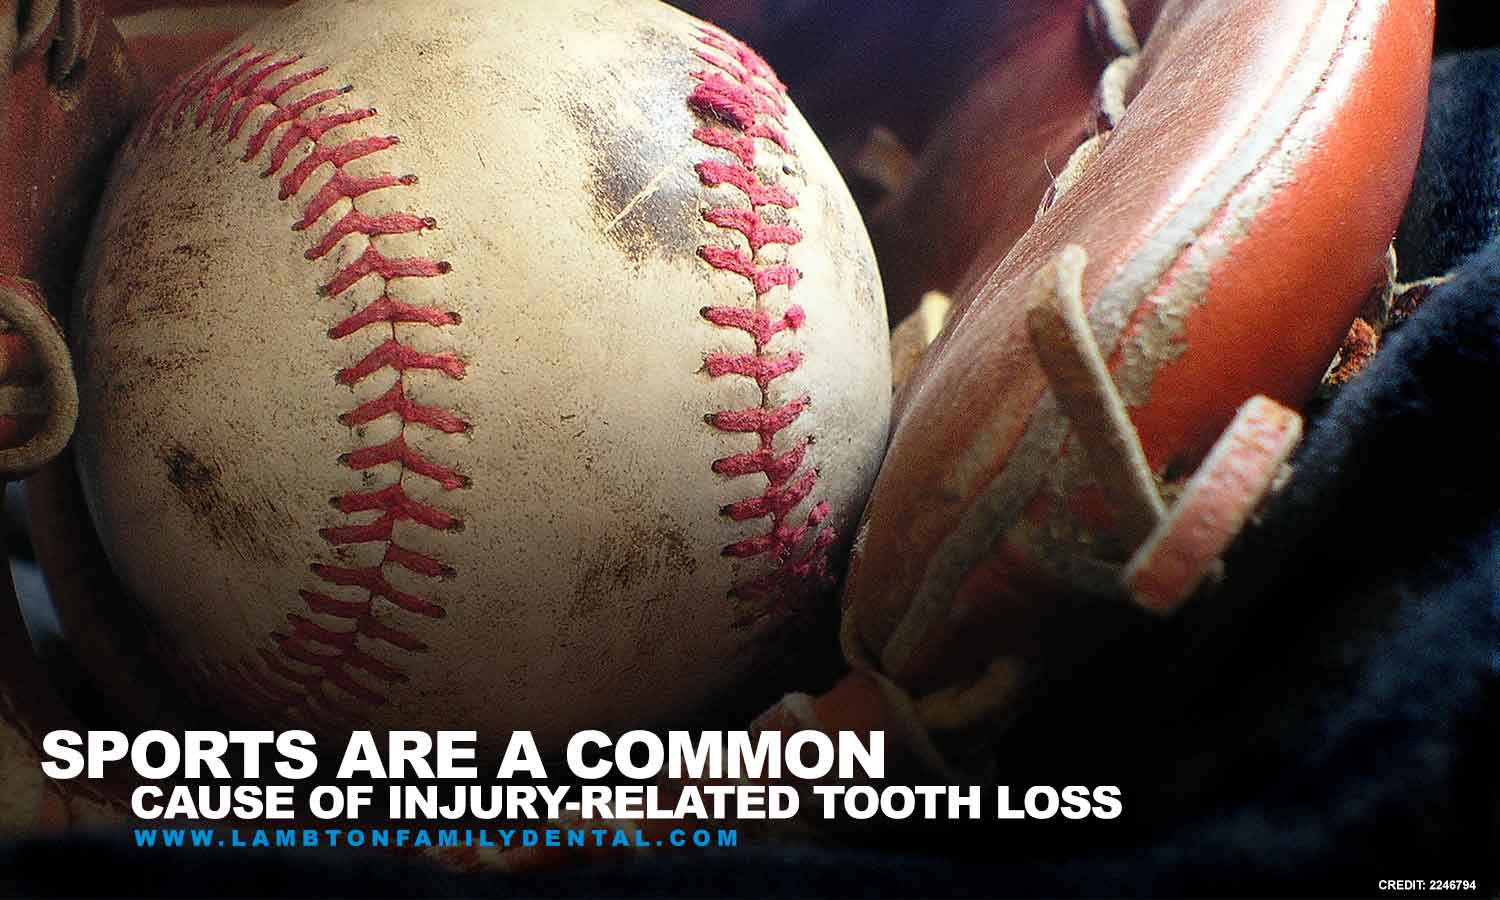 Sports are a common cause of injury-related